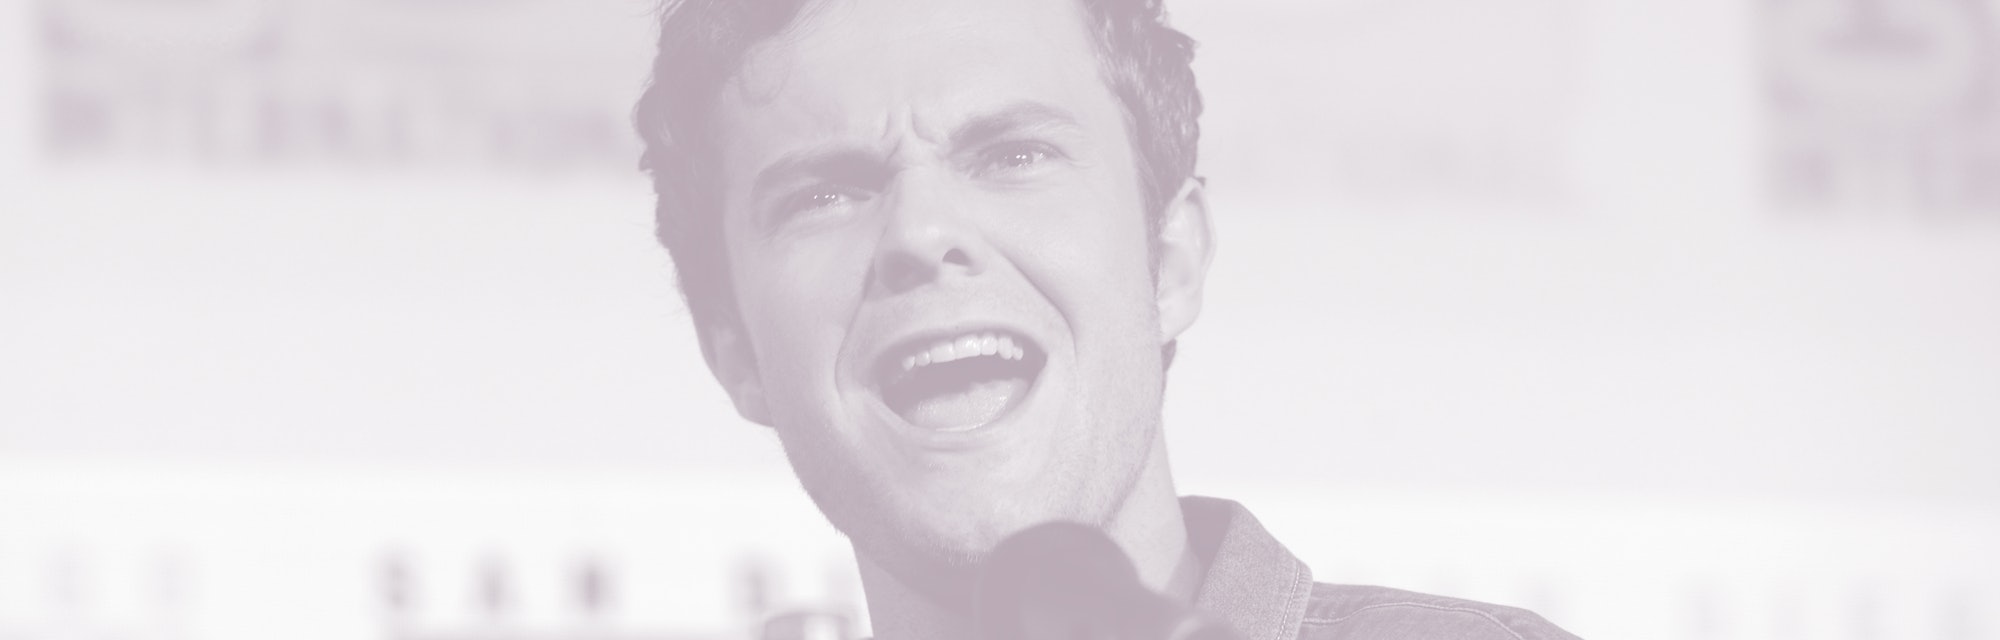 SAN DIEGO, CALIFORNIA - JULY 20: Jack Quaid speaks at the "Enter The Star Trek Universe" Panel durin...